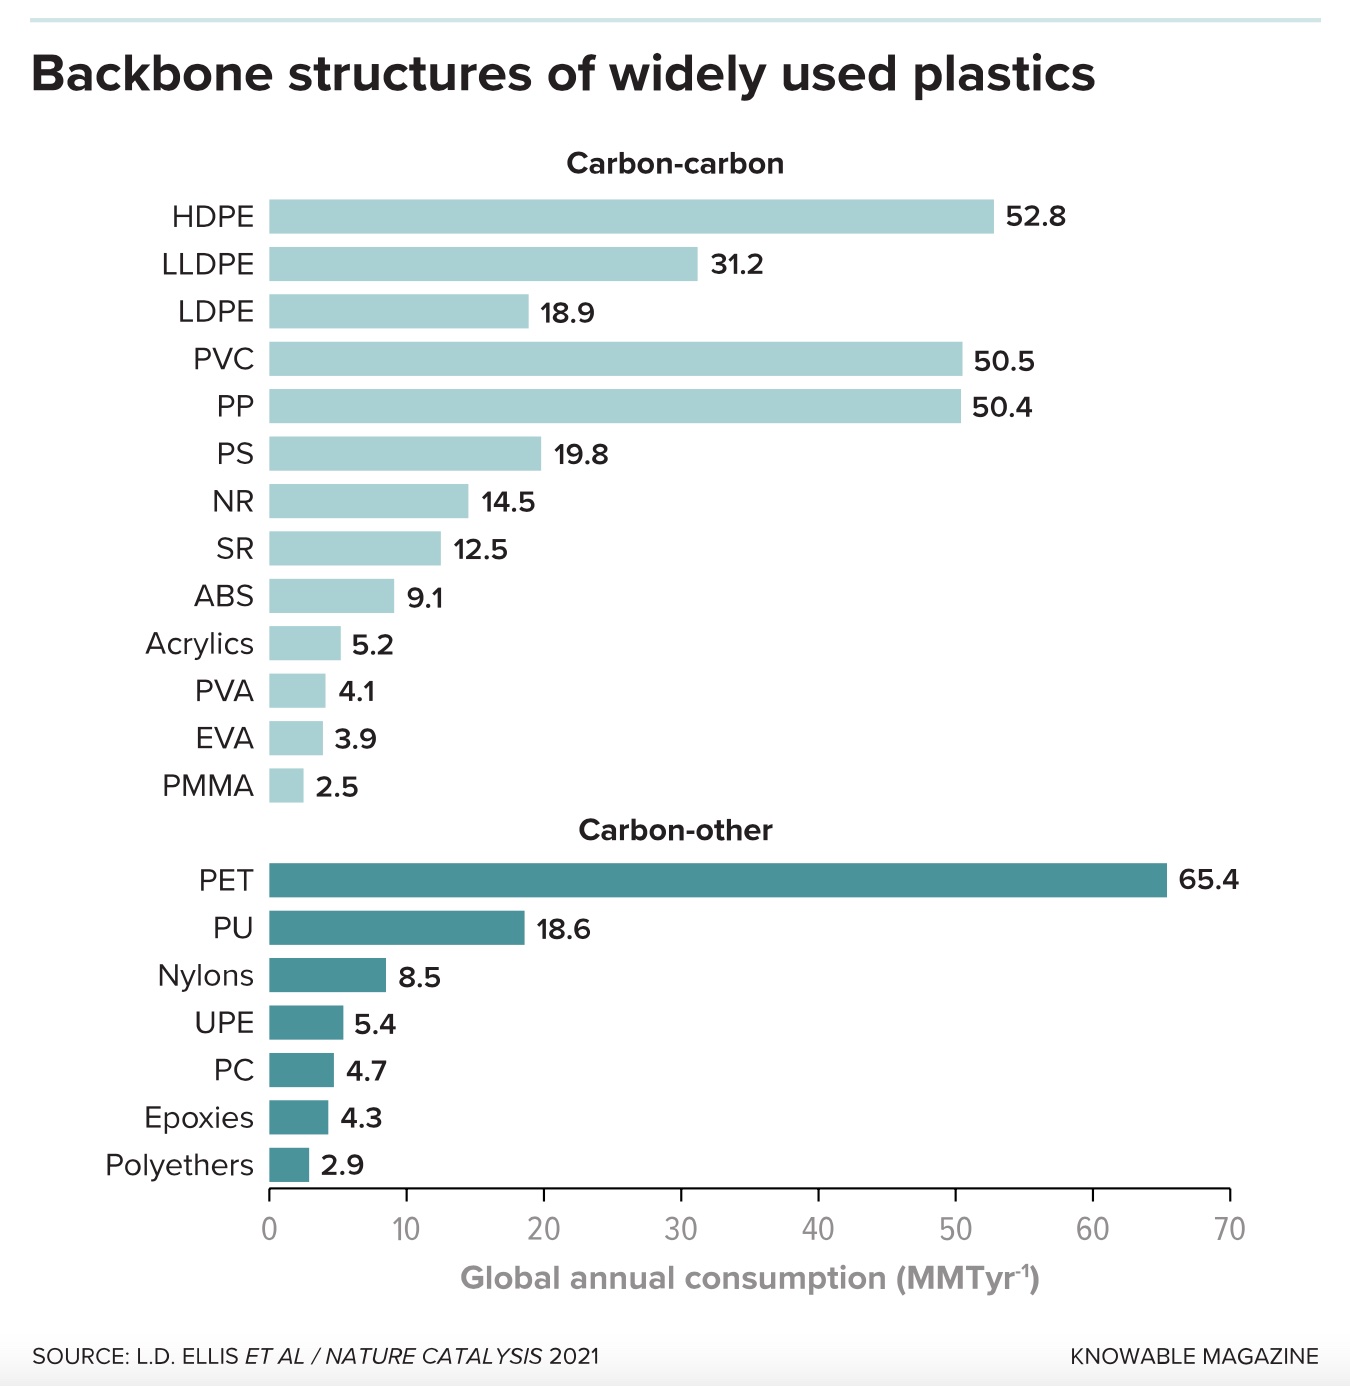 Widely used plastics with recyclable backbone structures.